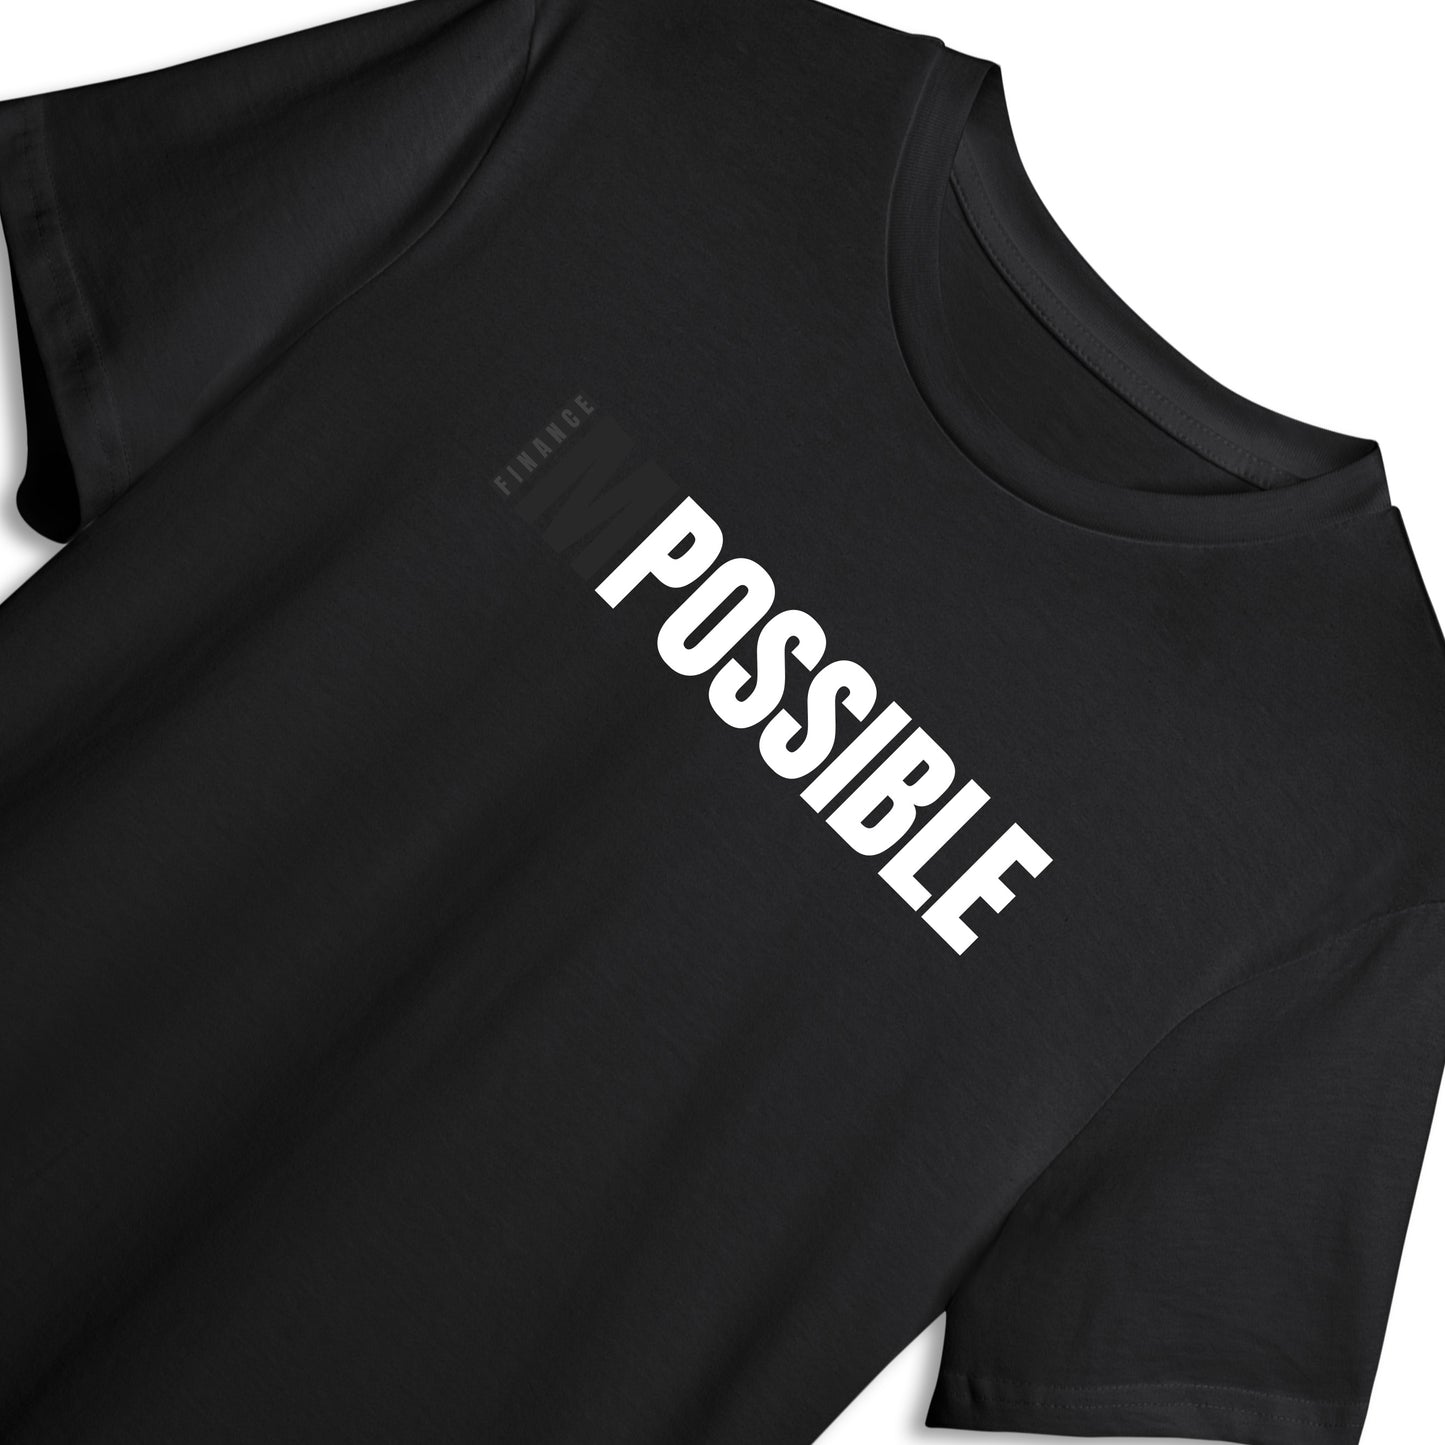 Impossible Finance T-shirt